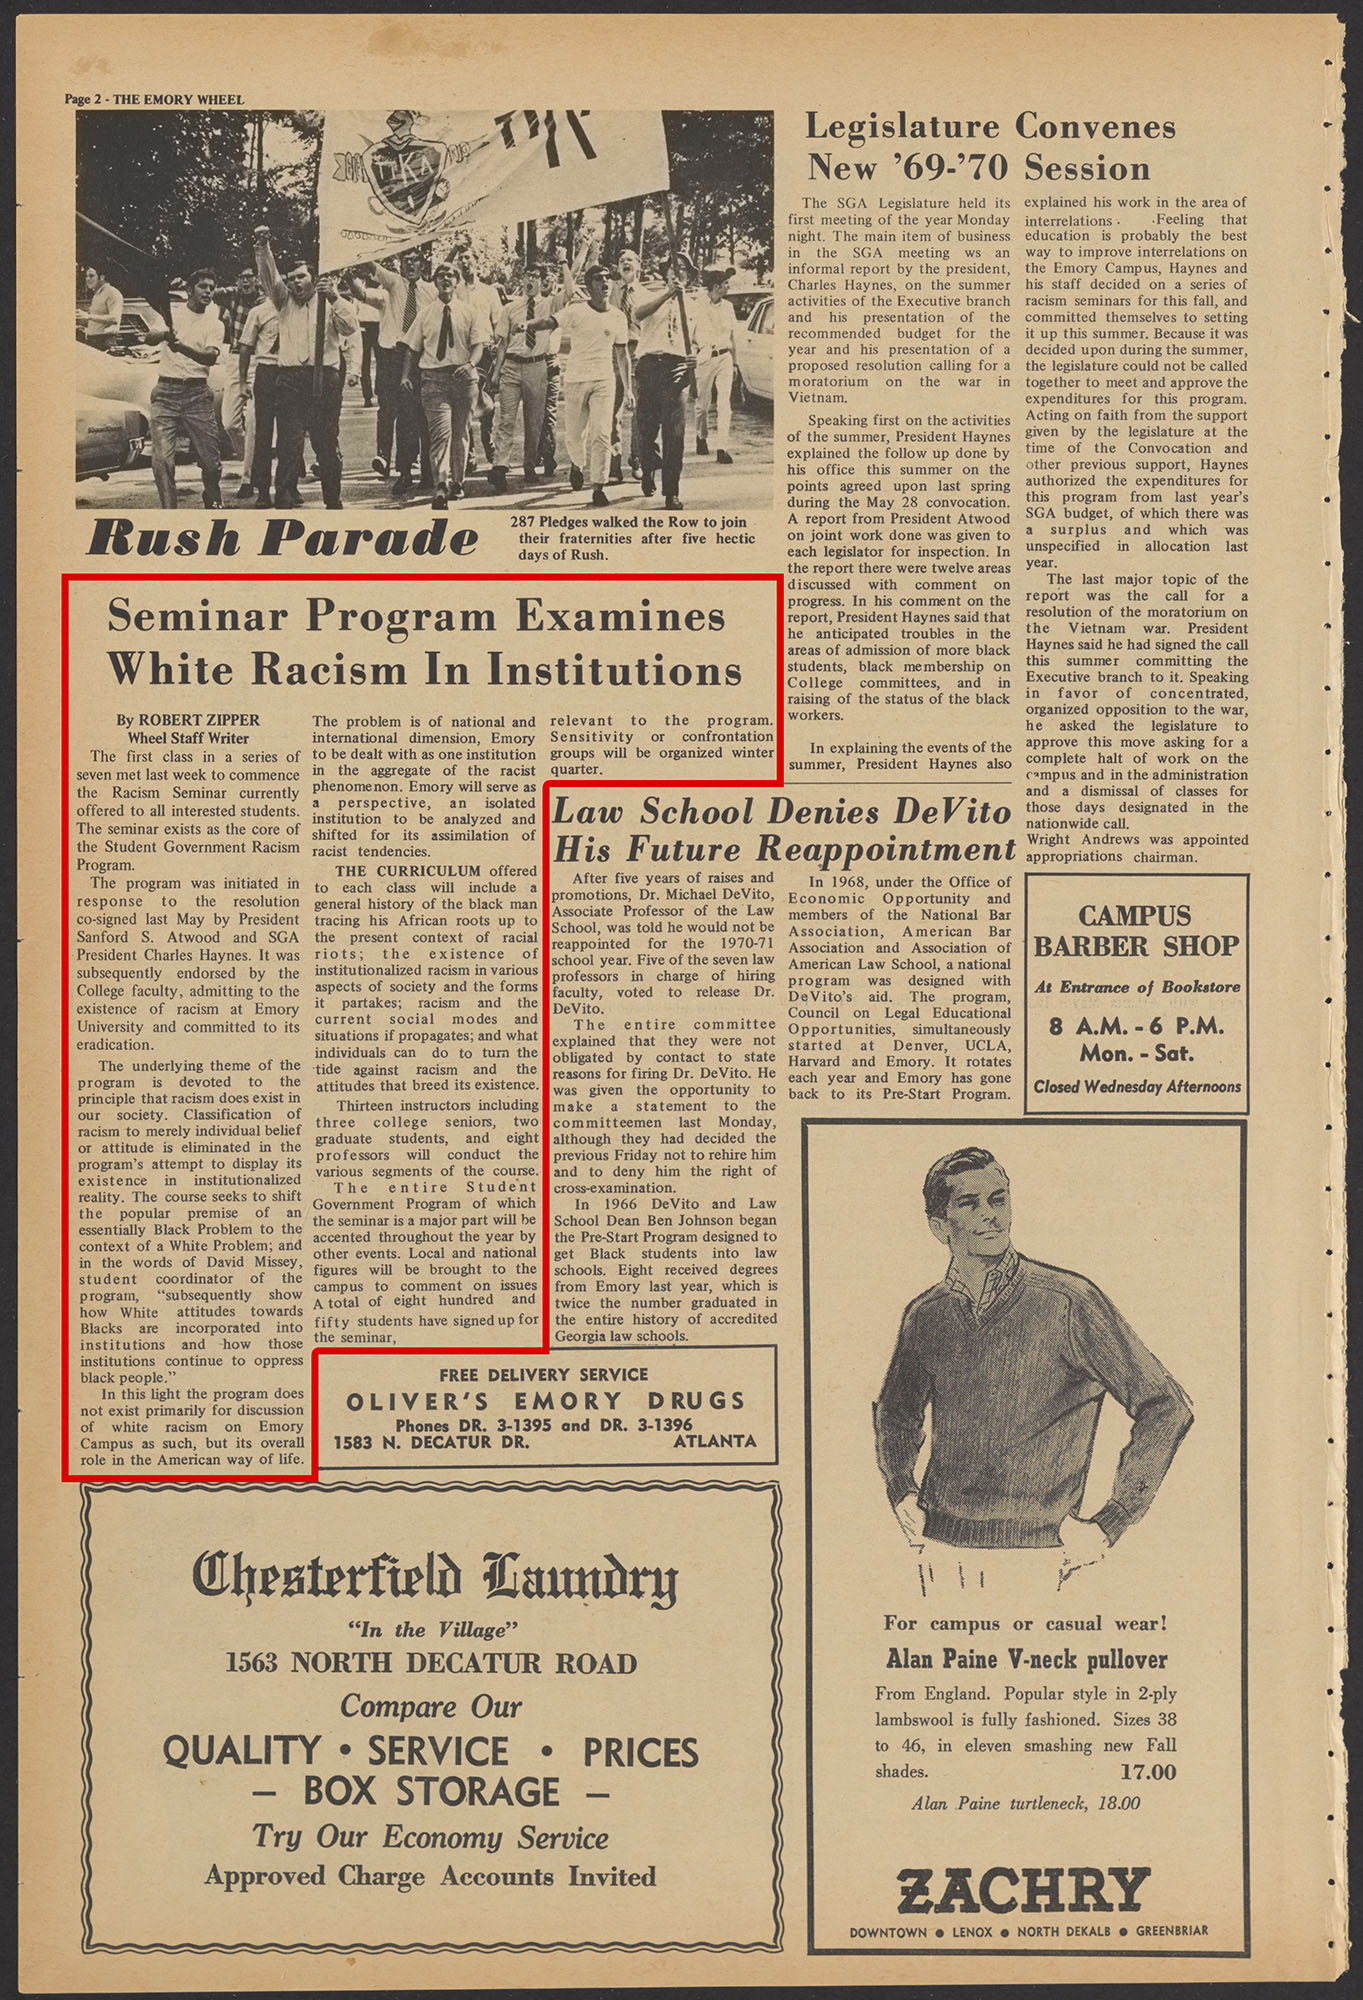 Emory Wheel newspaper page with article on SGA racism seminars